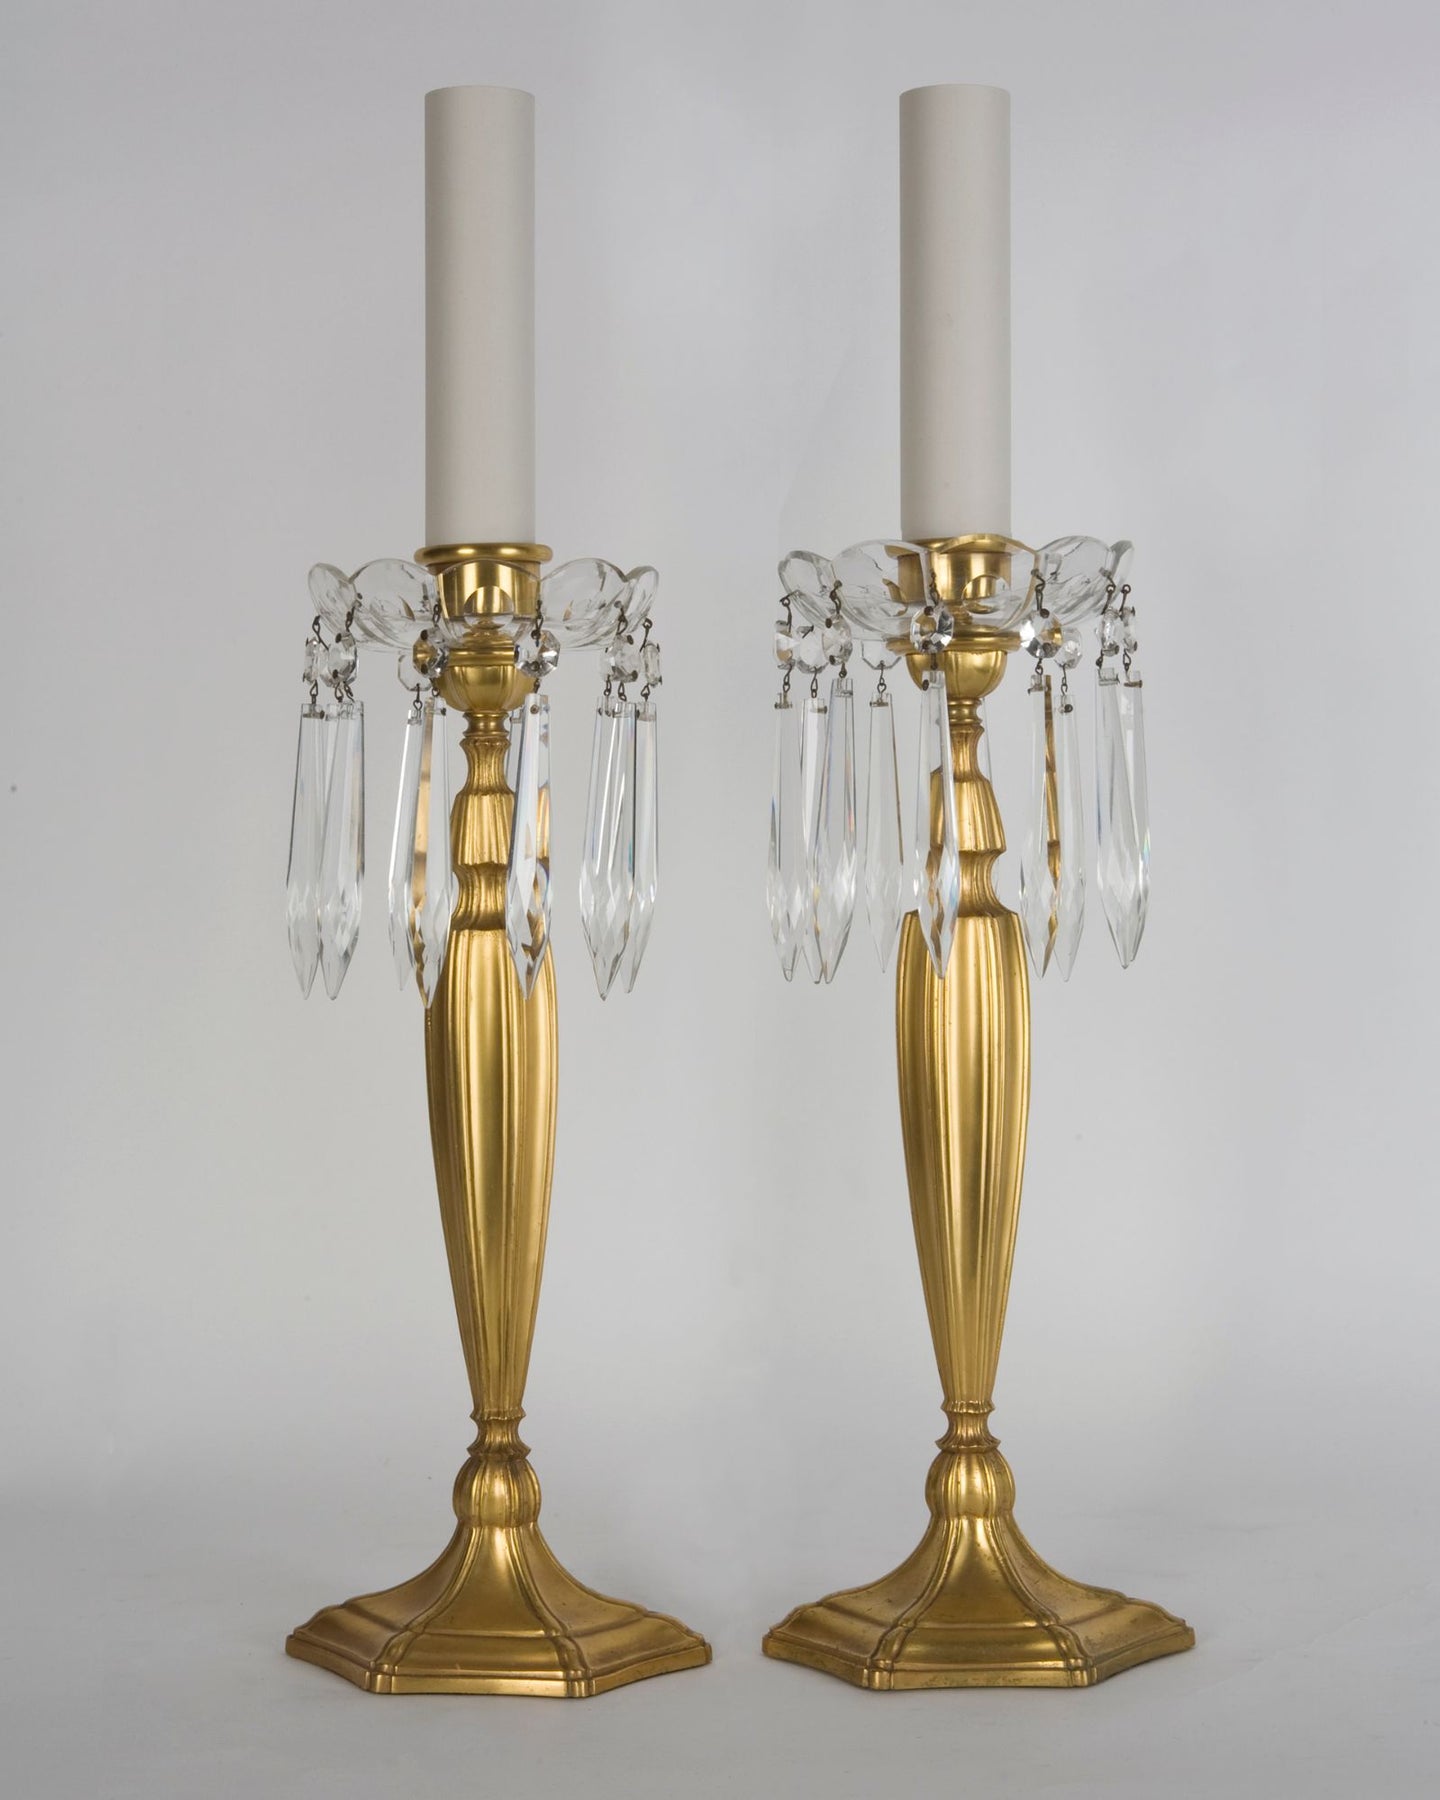 Takke Migration Spanien Candlestick Lamps with Crystal Prisms by Sterling Bronze | Vintage  Collection